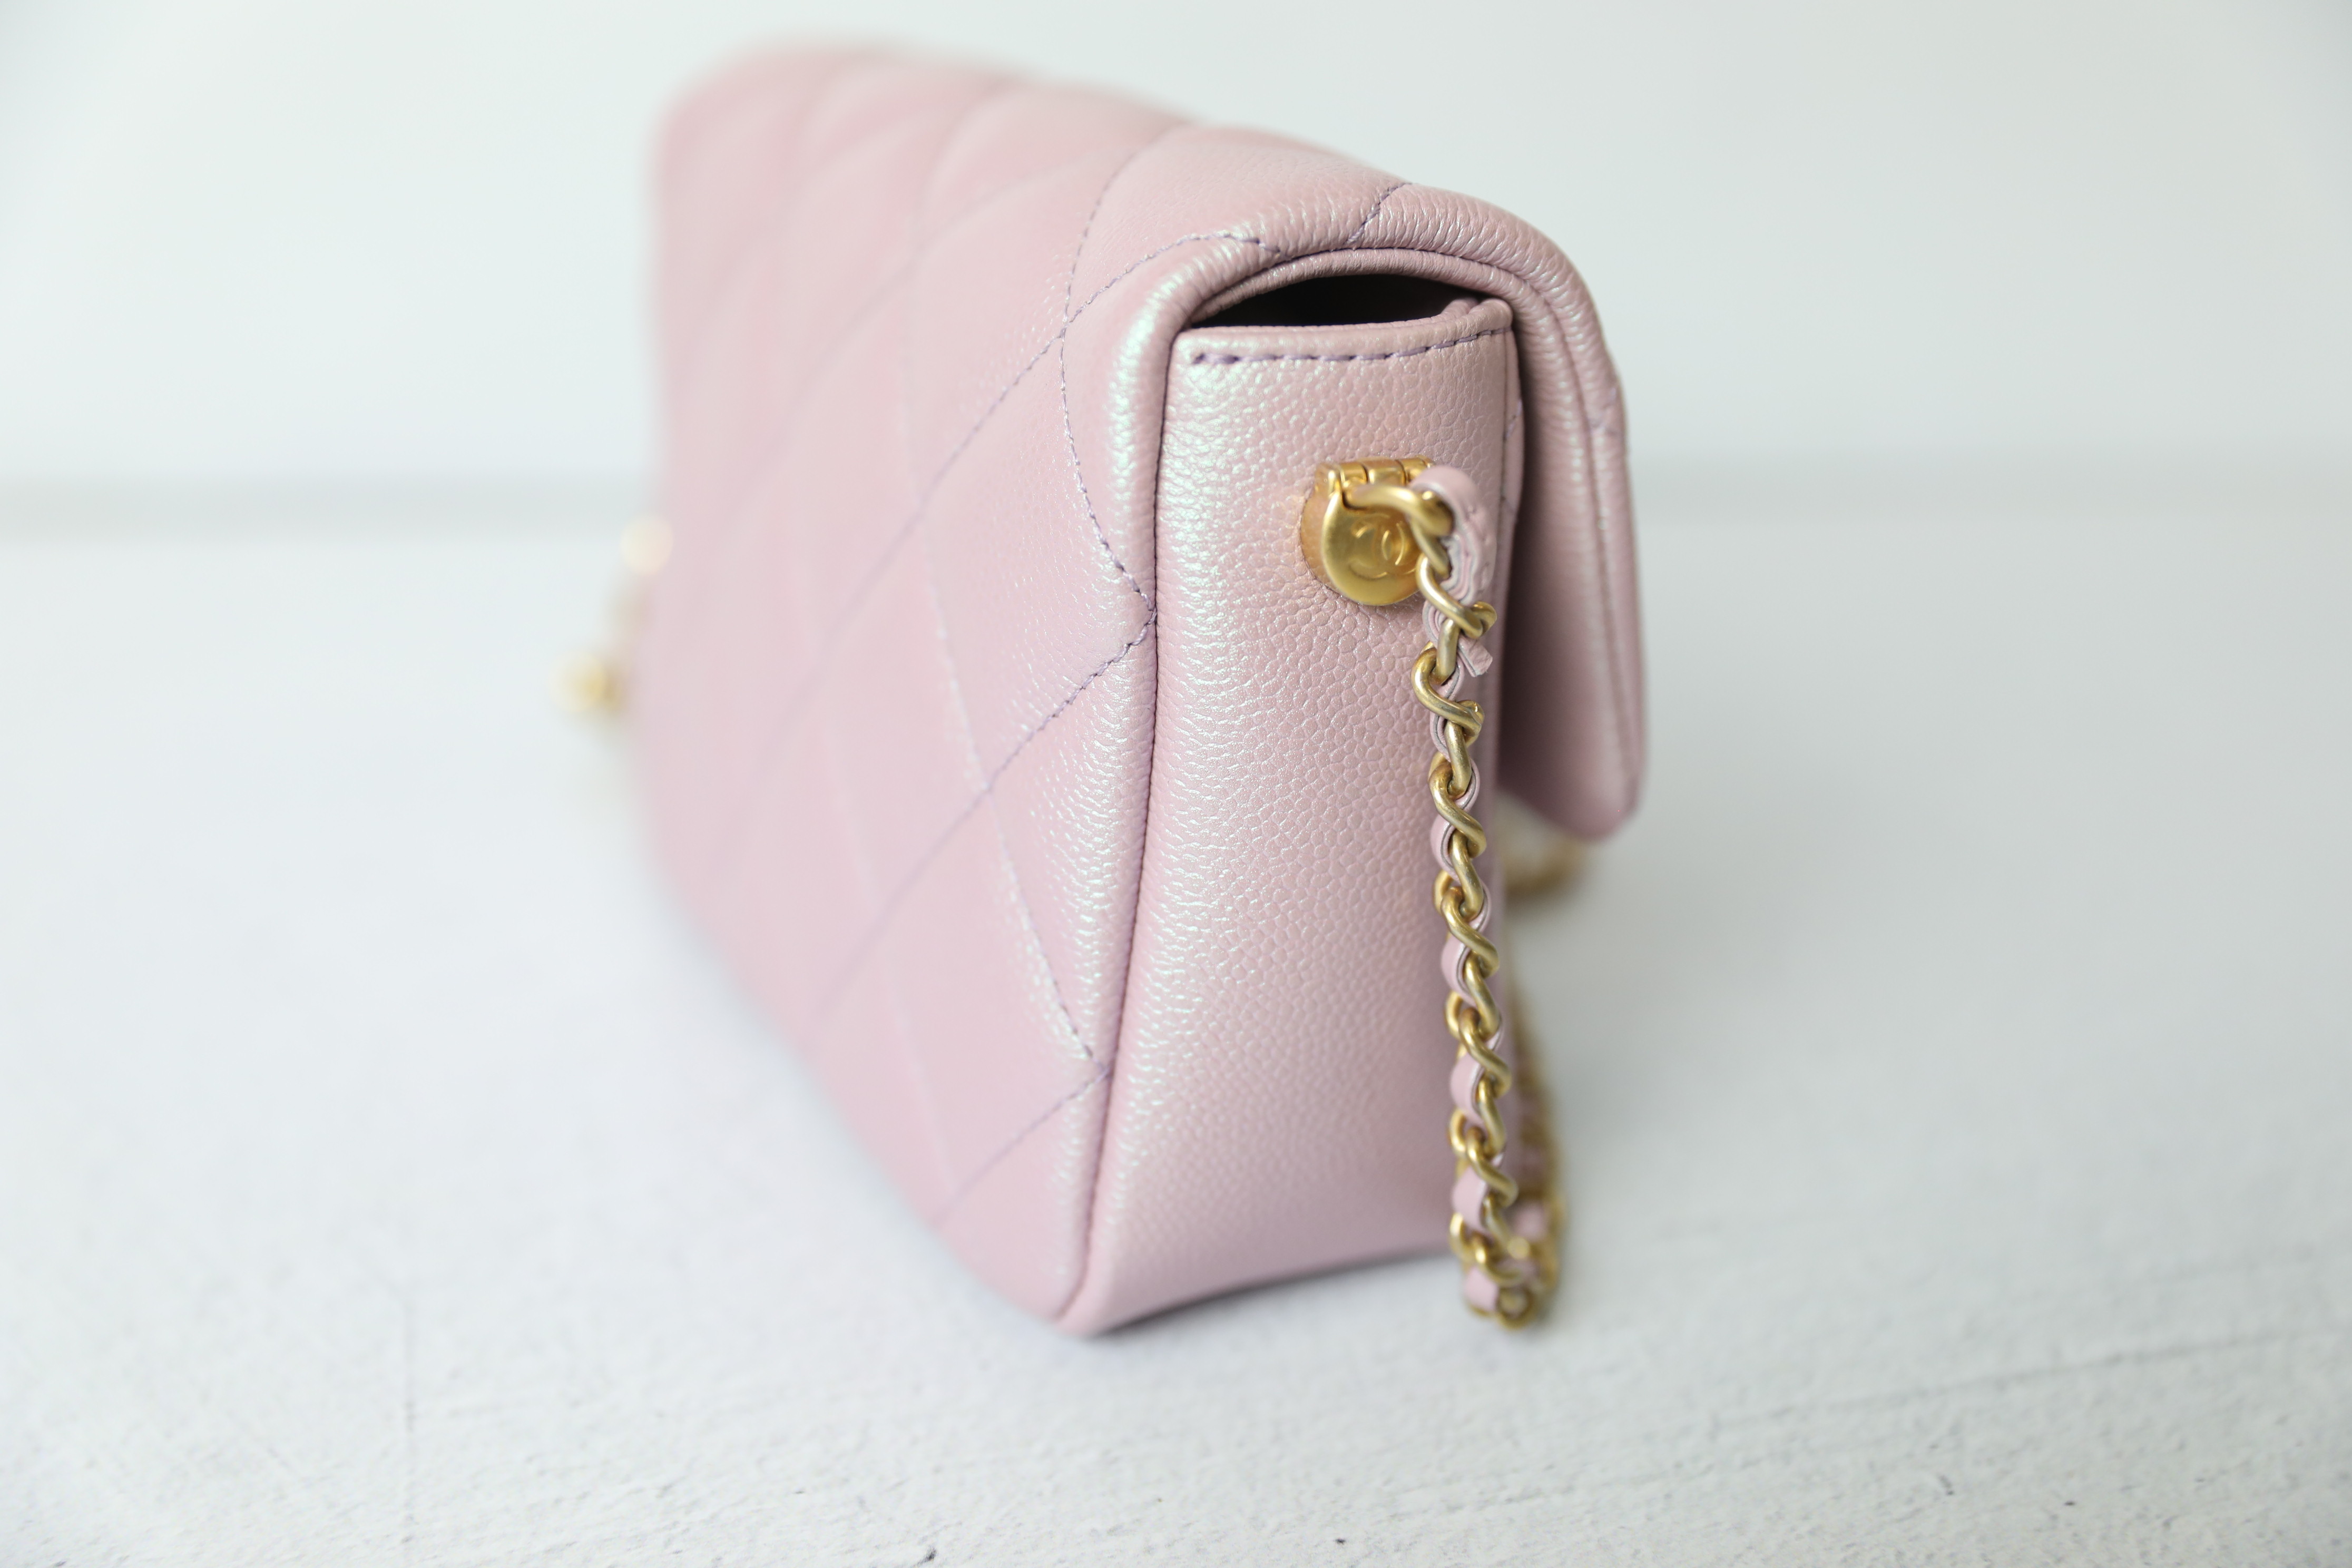 Chanel My Perfect Mini Flap, Iridescent Pink Caviar with Gold Hardware, New  in Box WA001